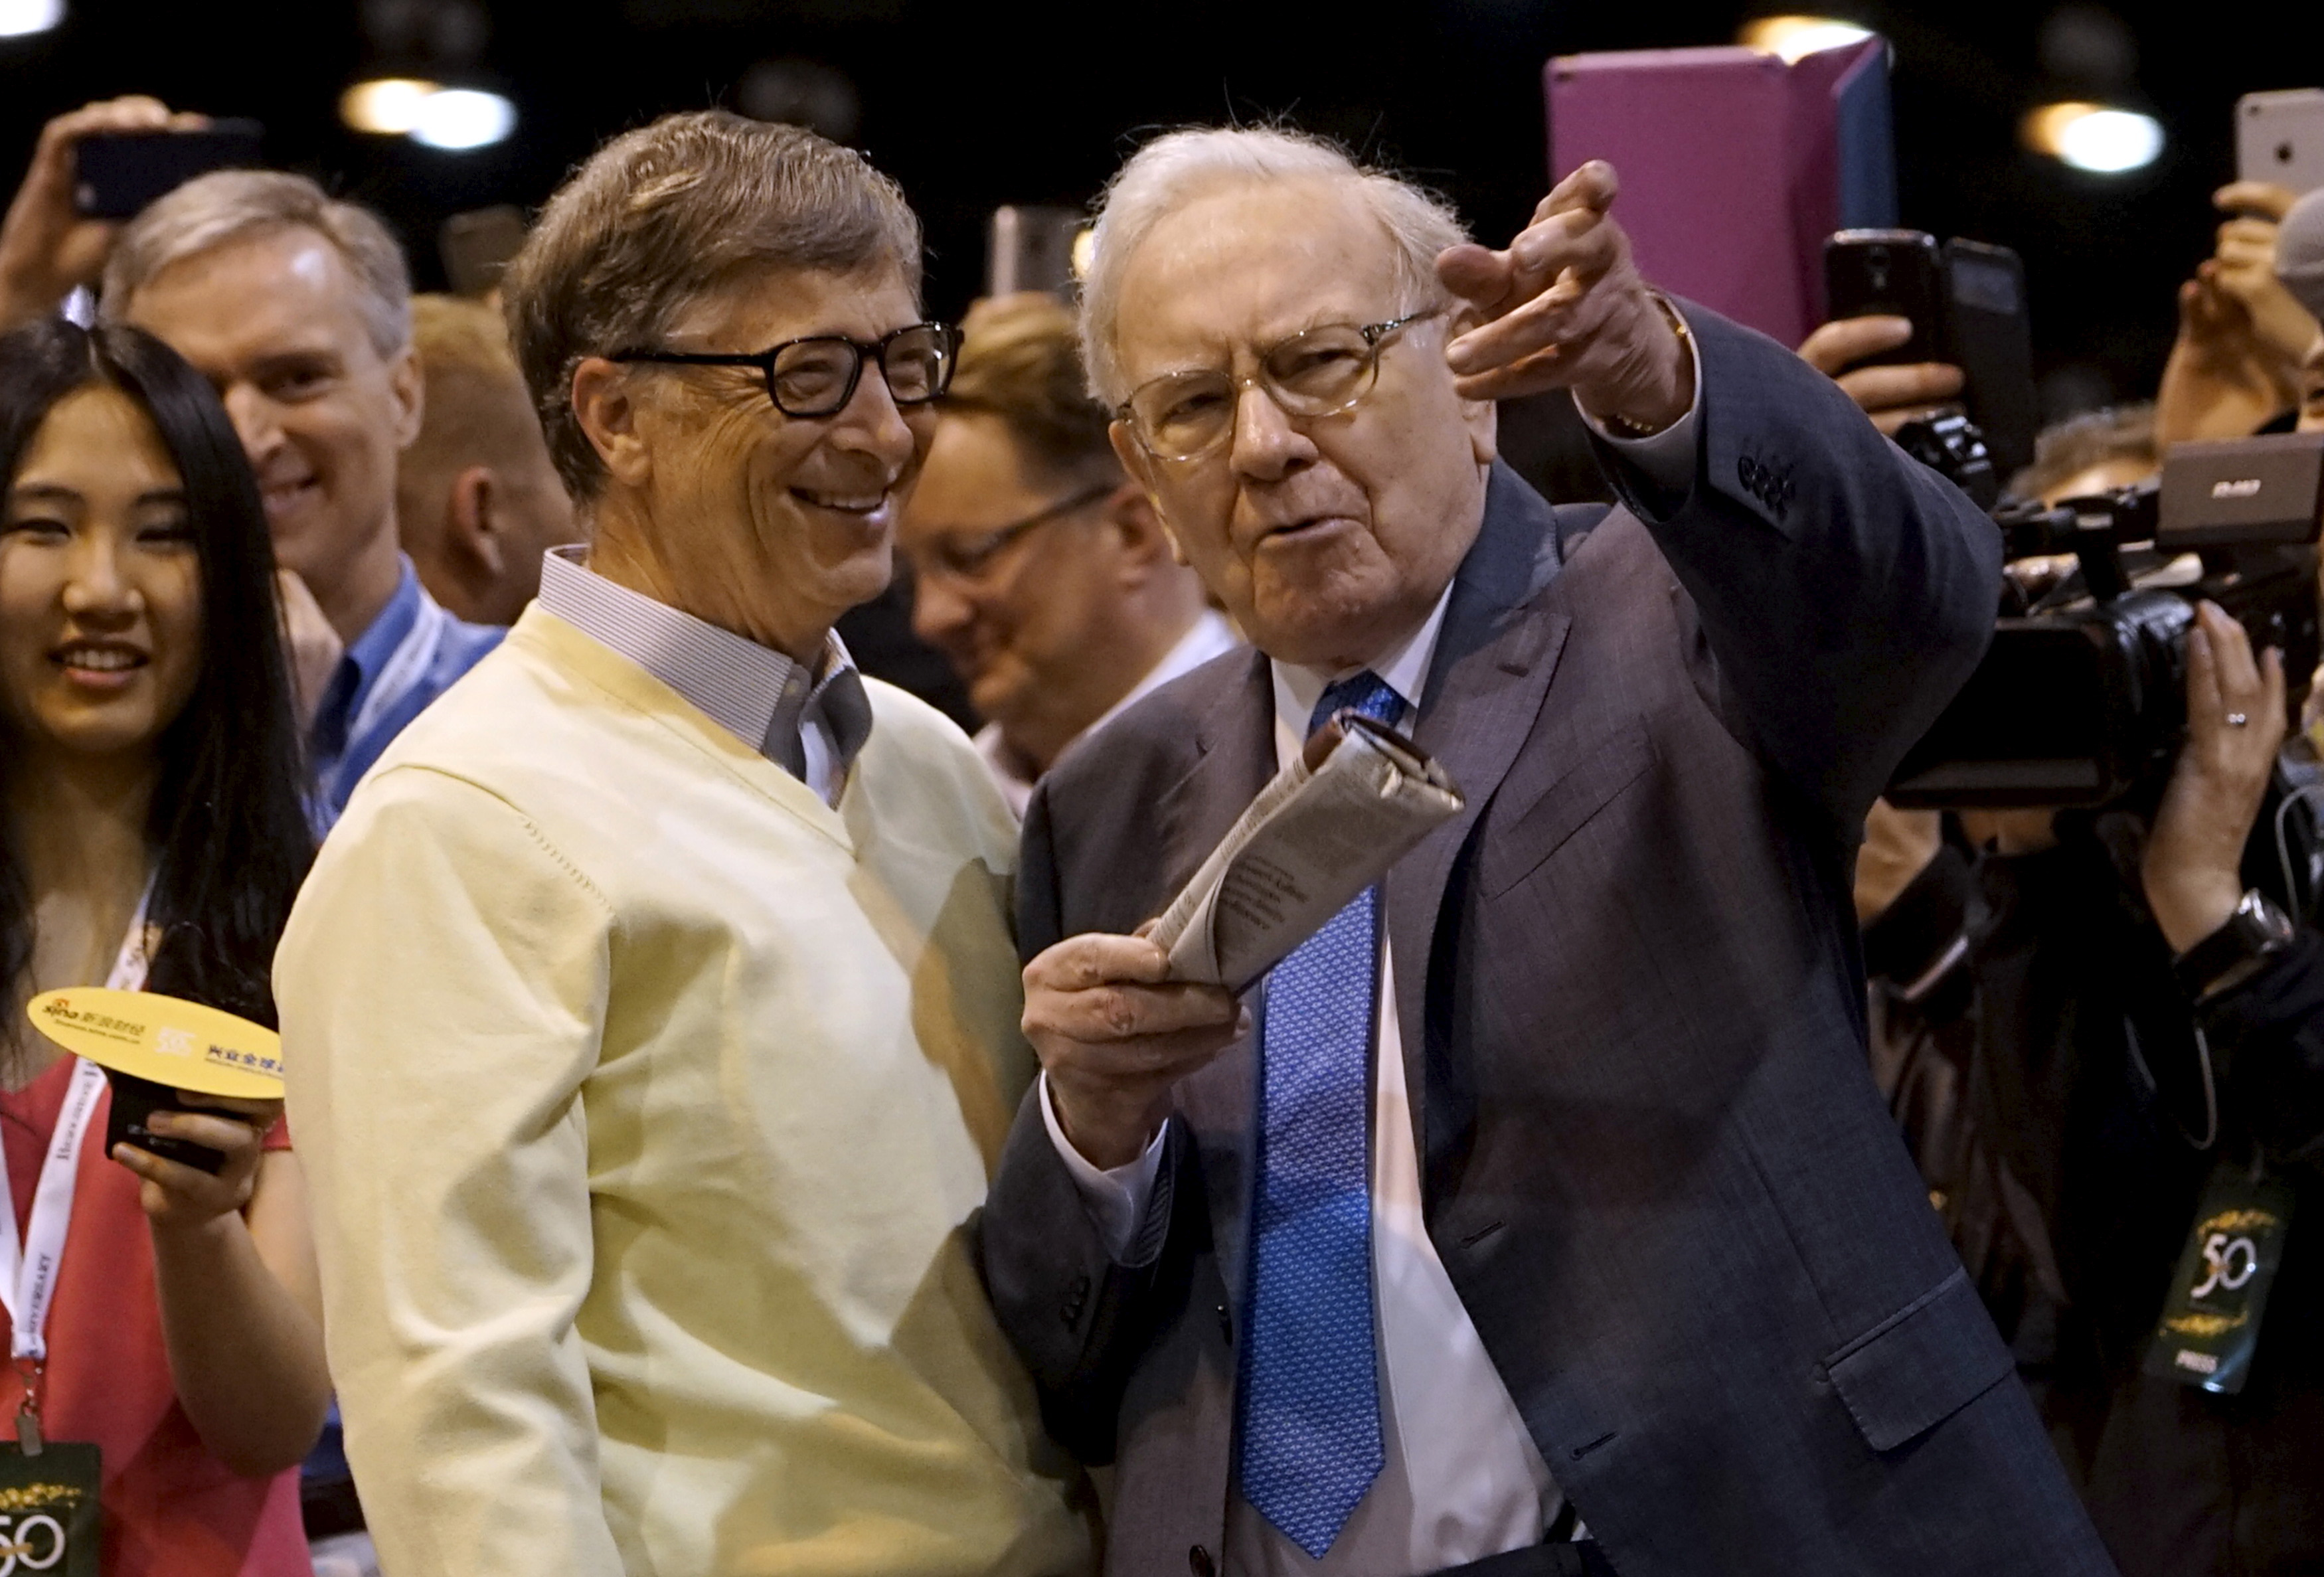 Berkshire Hathaway CEO Warren Buffett shows his friend Microsoft co-founder Bill Gates the finer points of newspaper tossing, prior to the Berkshire annual meeting in Omaha